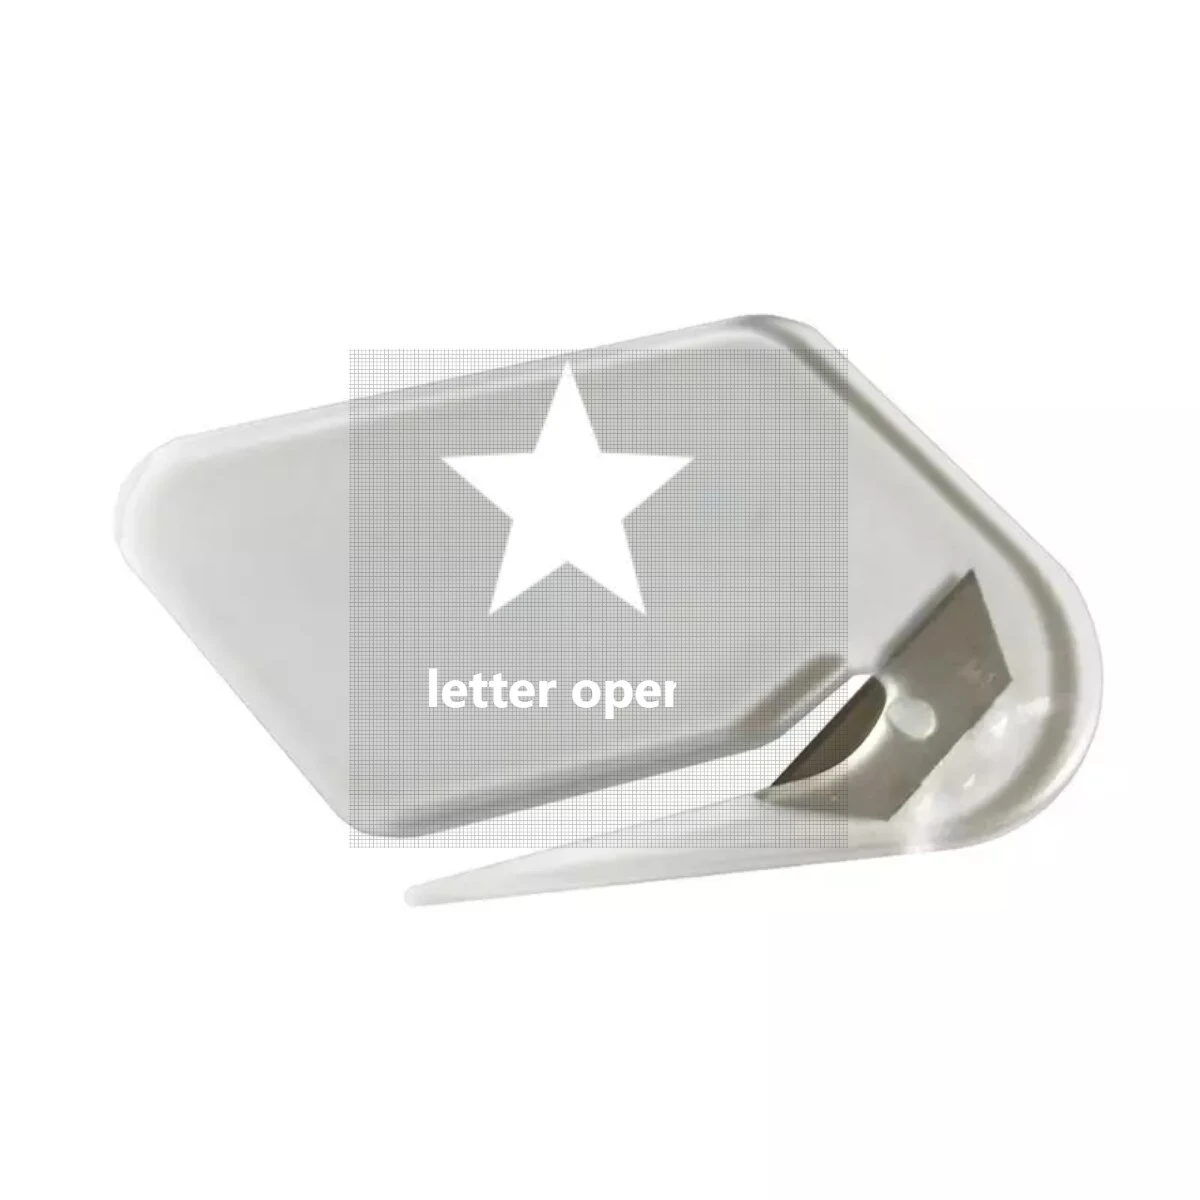 Cheap plastic letter opener knife promo customized logo paper cutter  portable wholesale business card cutter